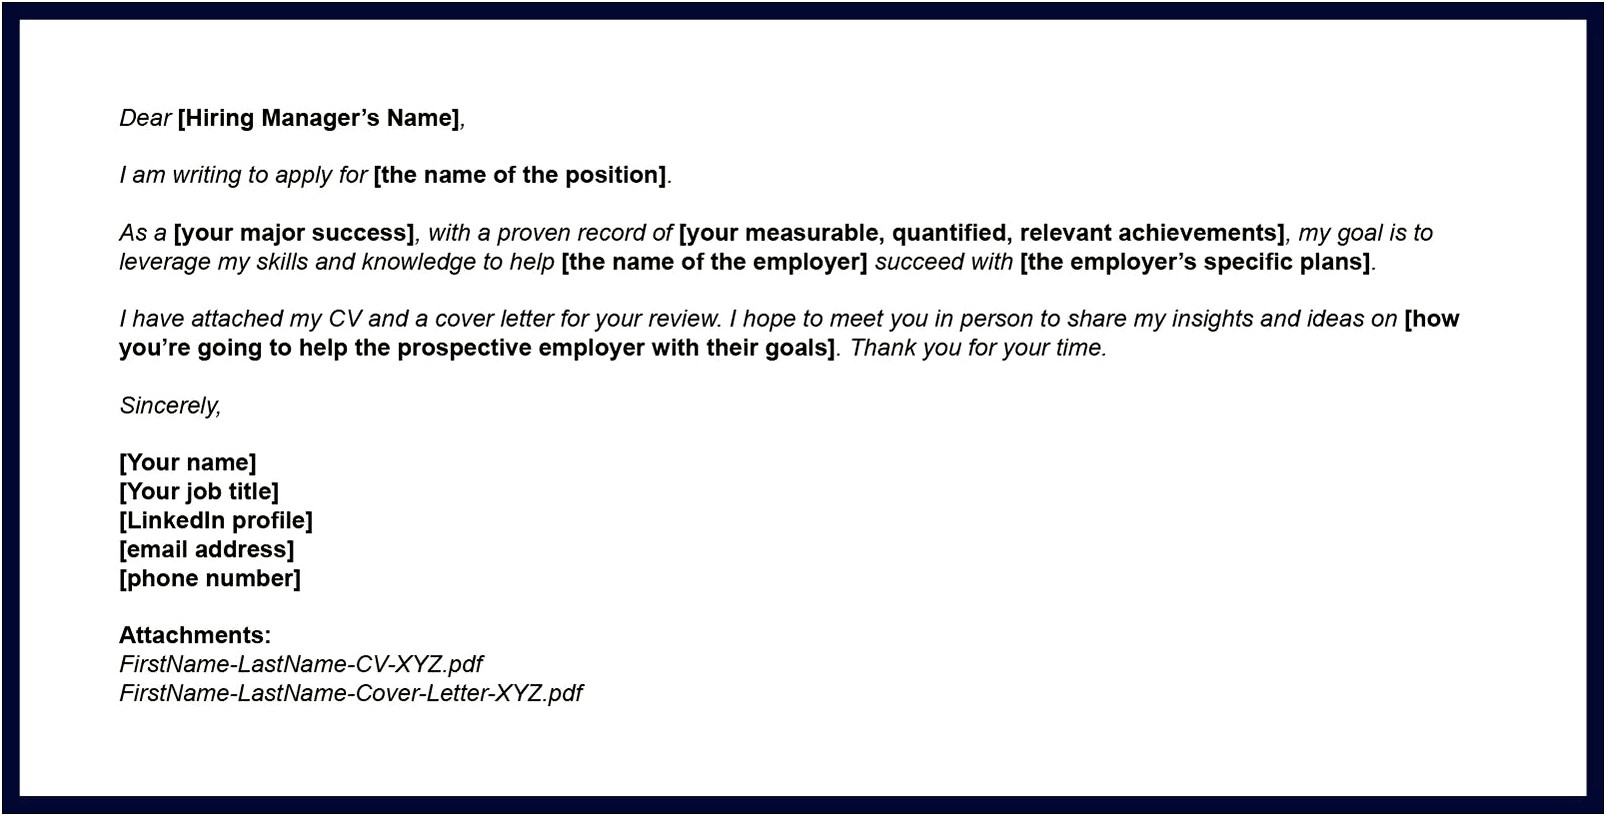 Job Email Format For Sending Resume To Company